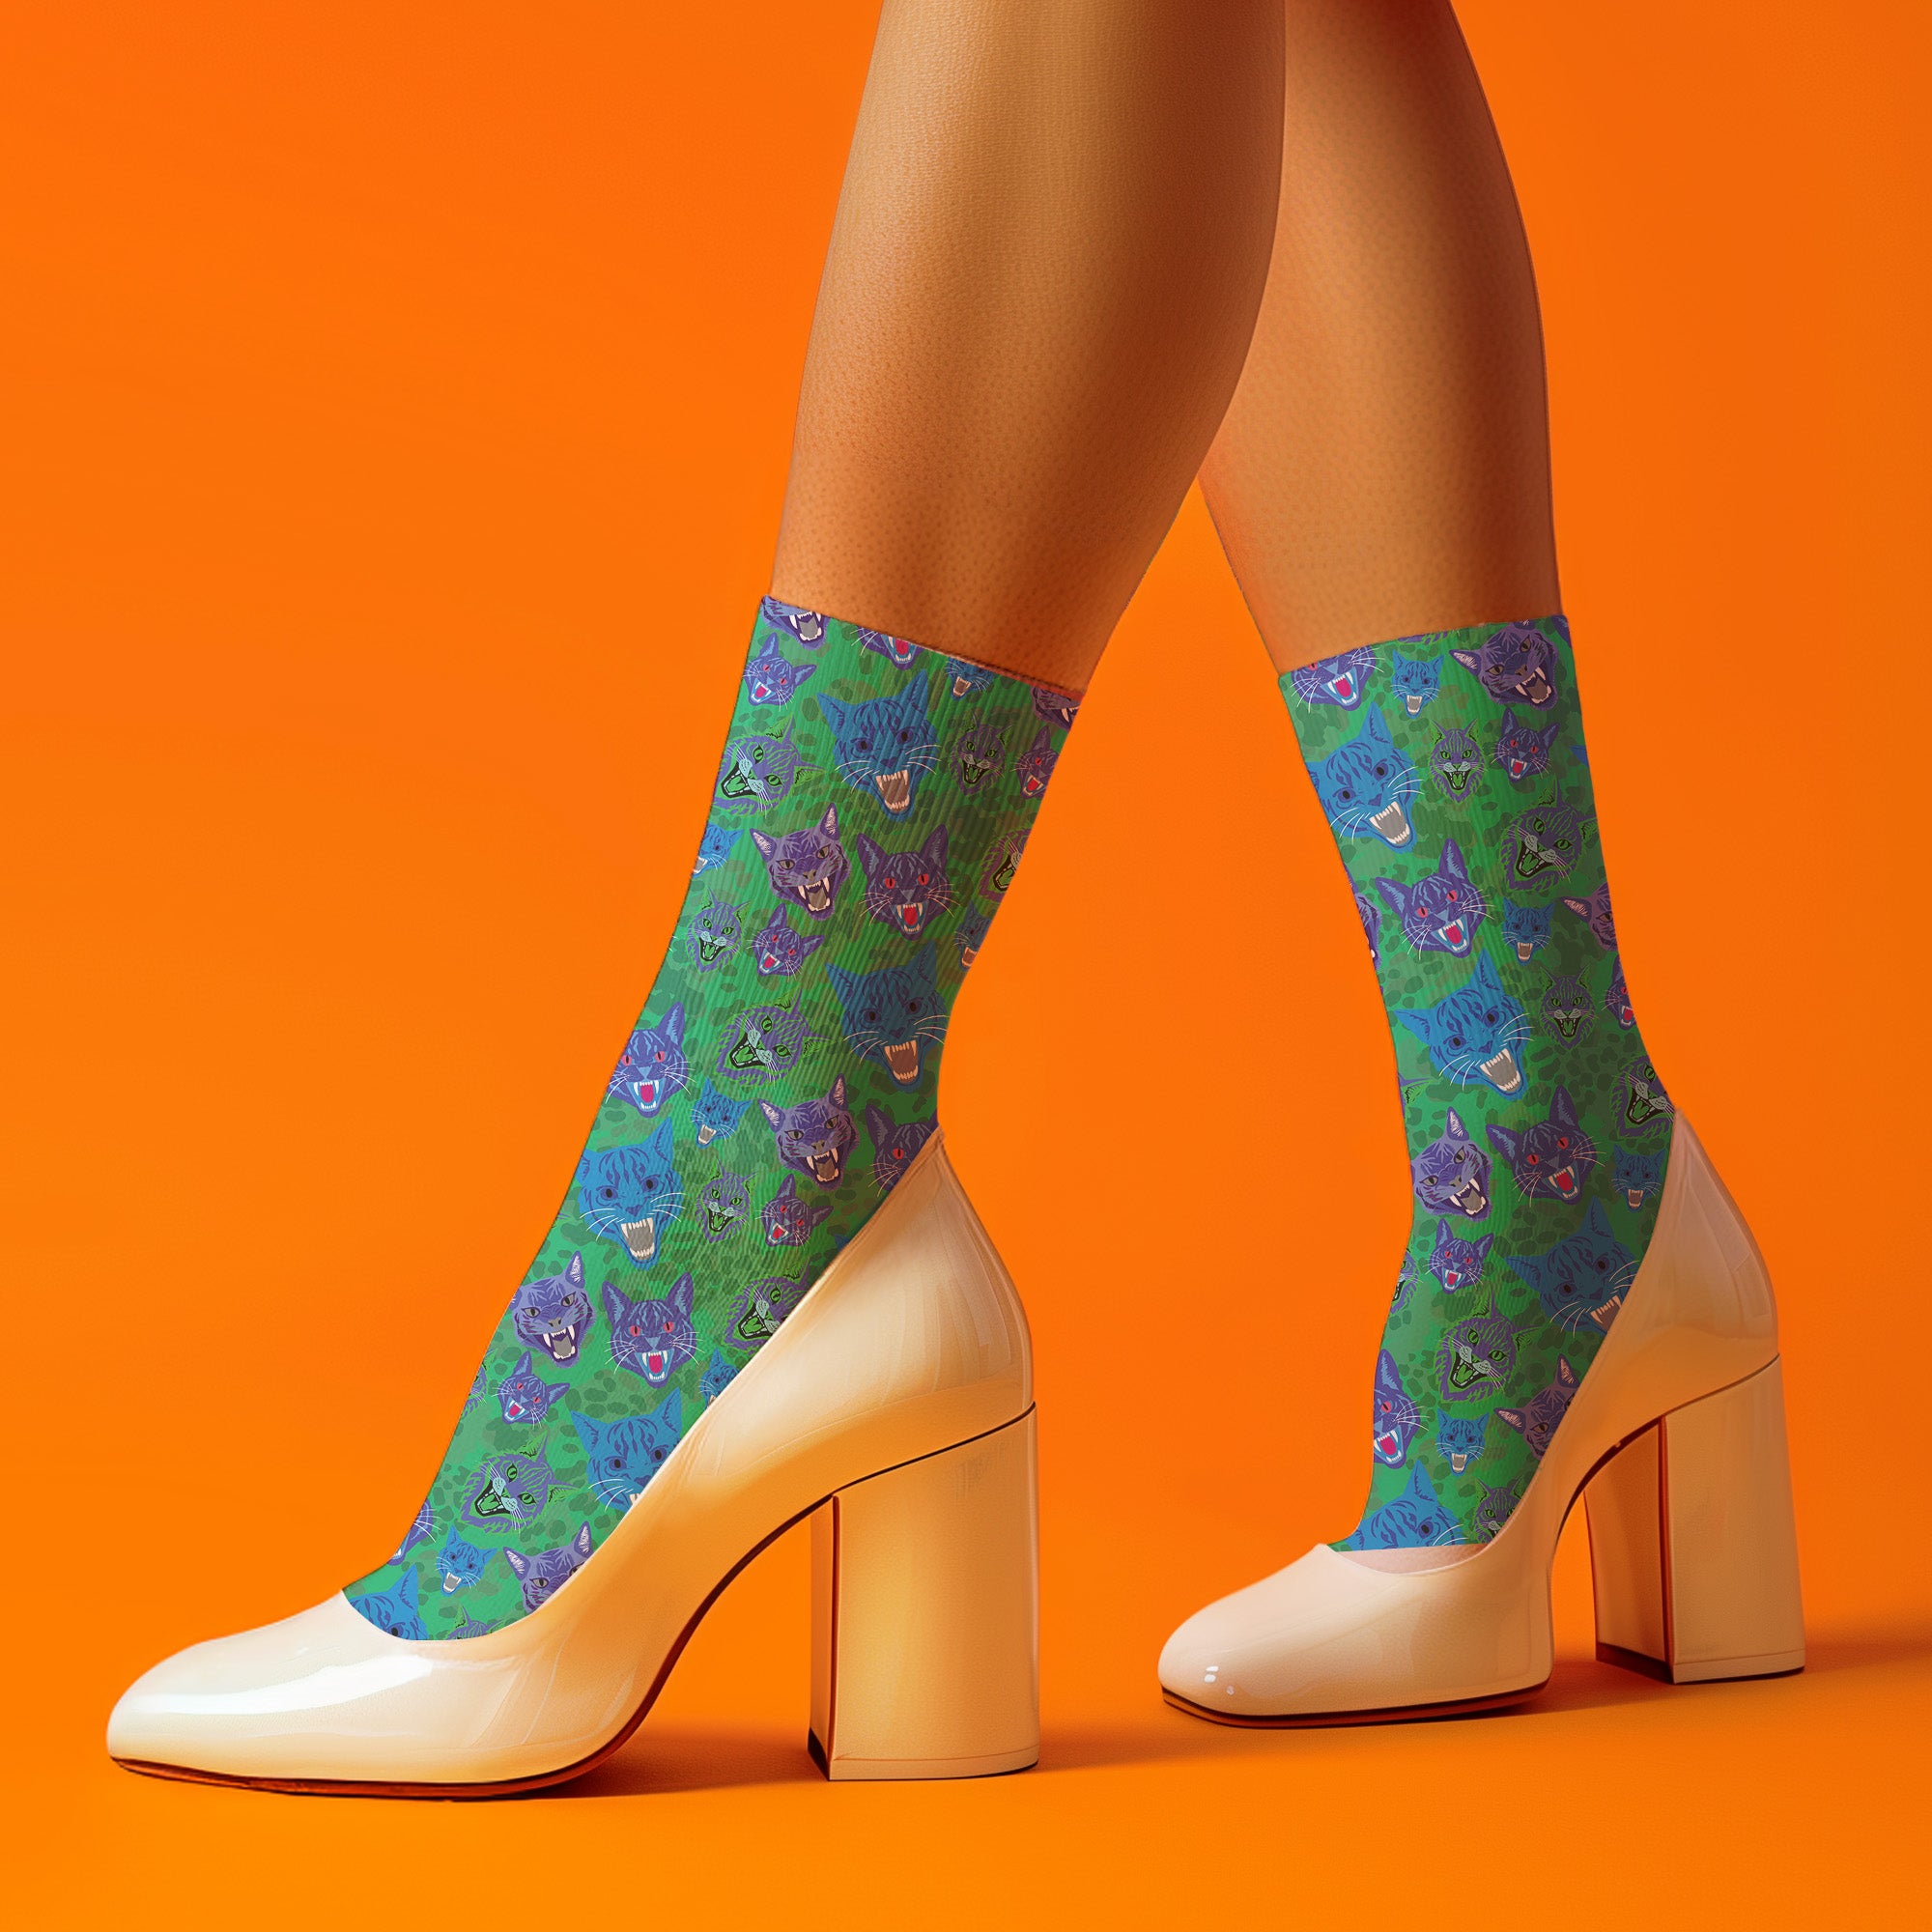 Fun and playful socks adorned with vibrant tiger head motifs on a green background, with black heels and toes, ideal for animal lovers and those who enjoy unique designs